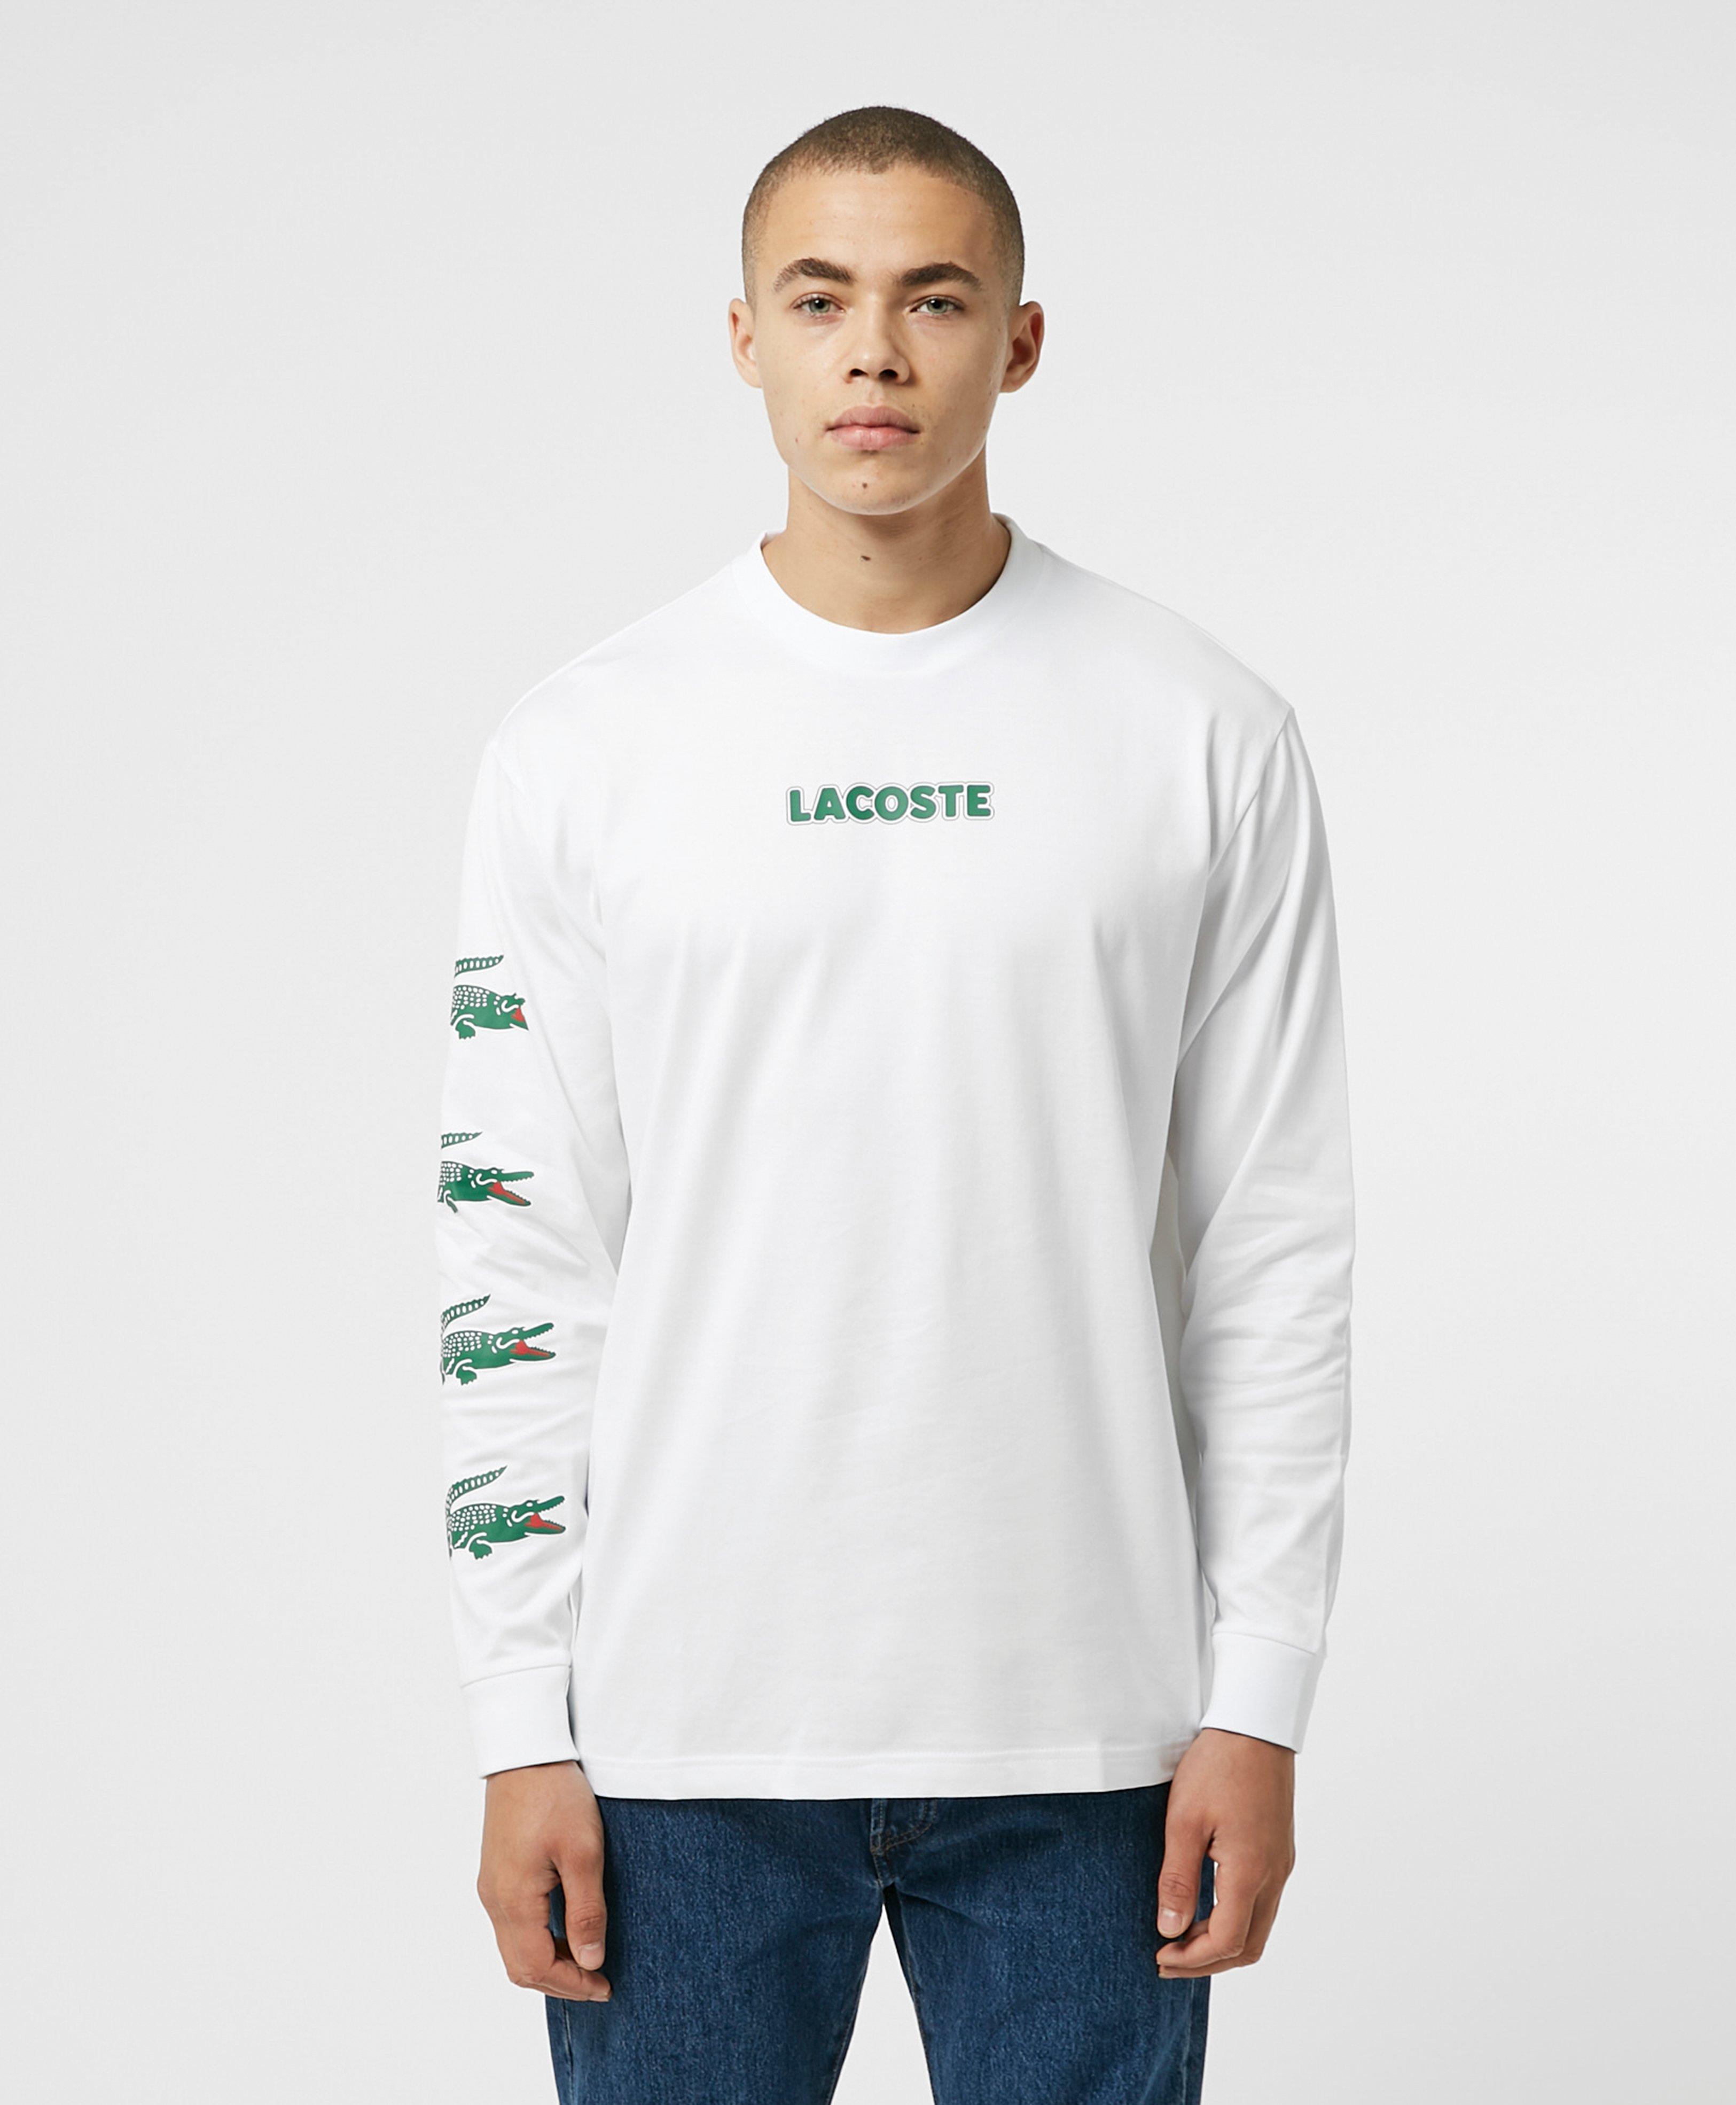 lacoste t shirts full sleeves